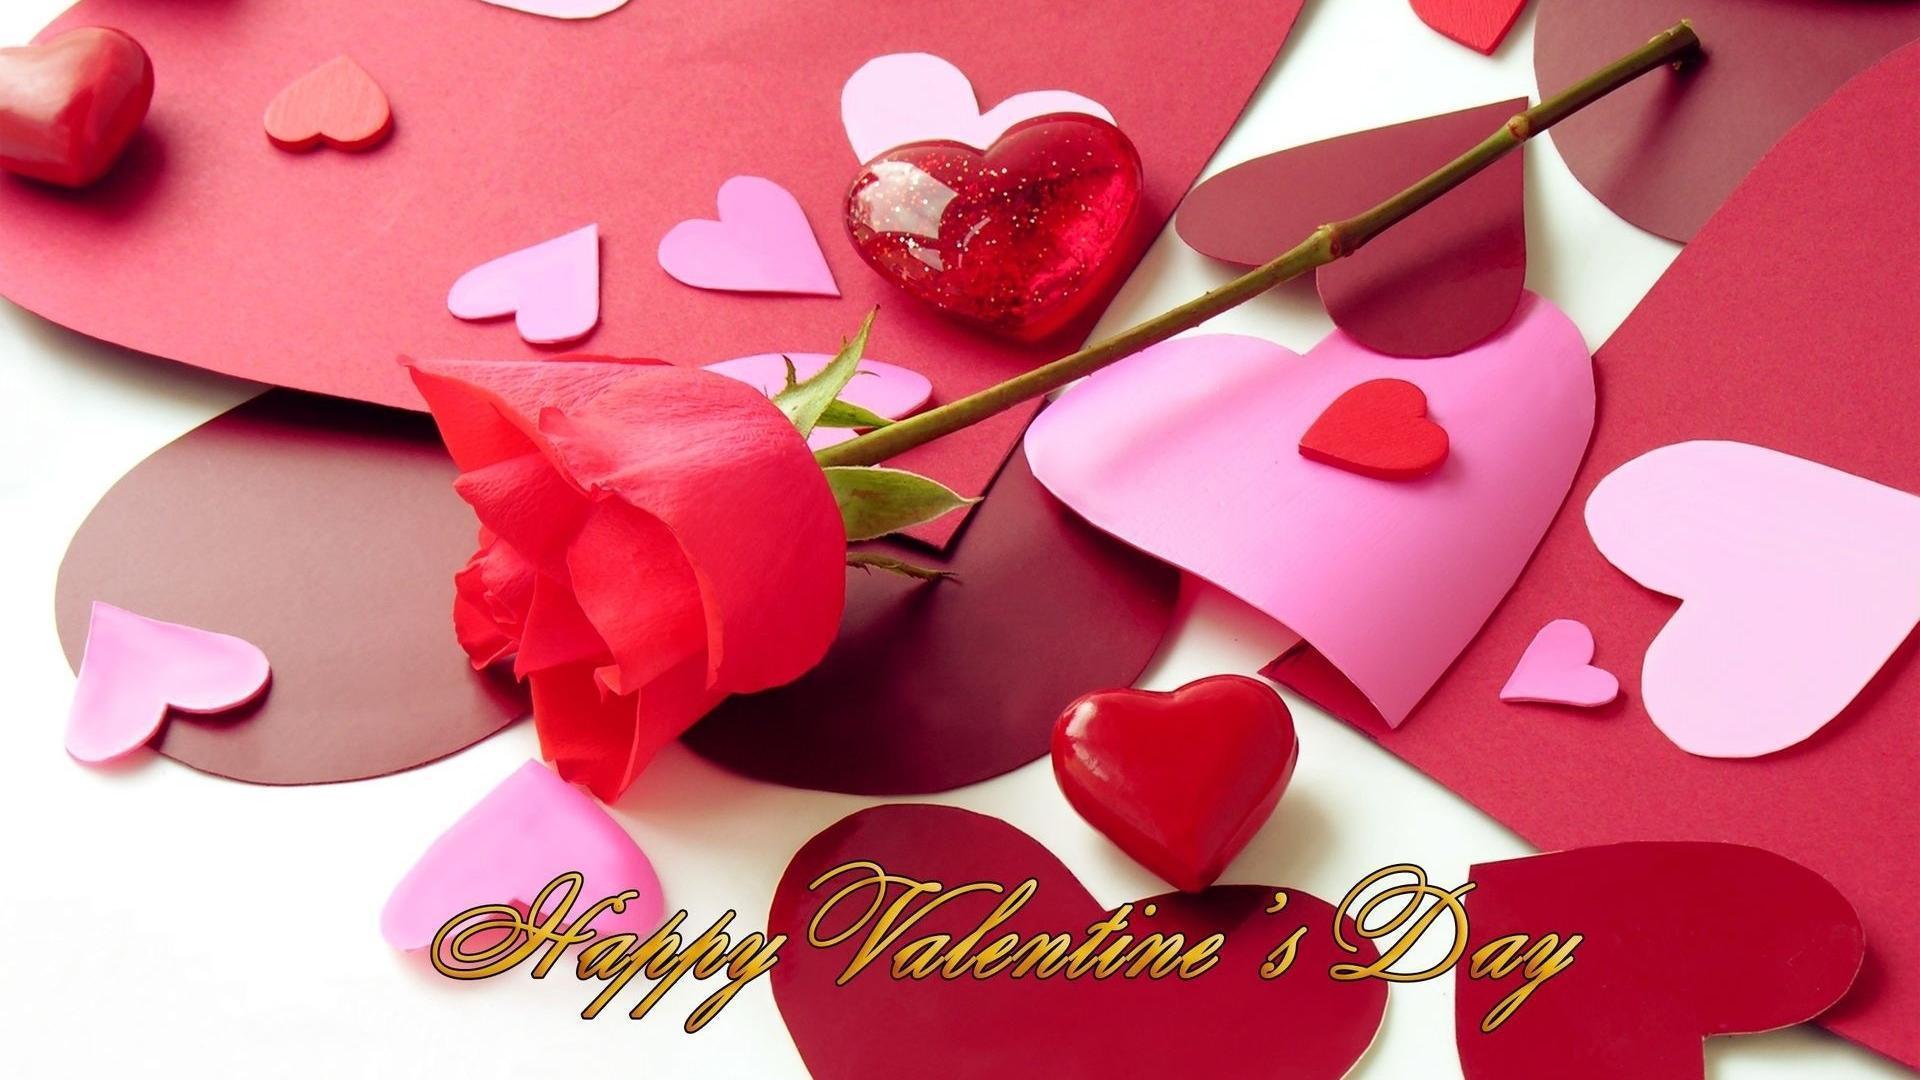 Happy Valentines Day Wallpaper. HD Wallpaper Early